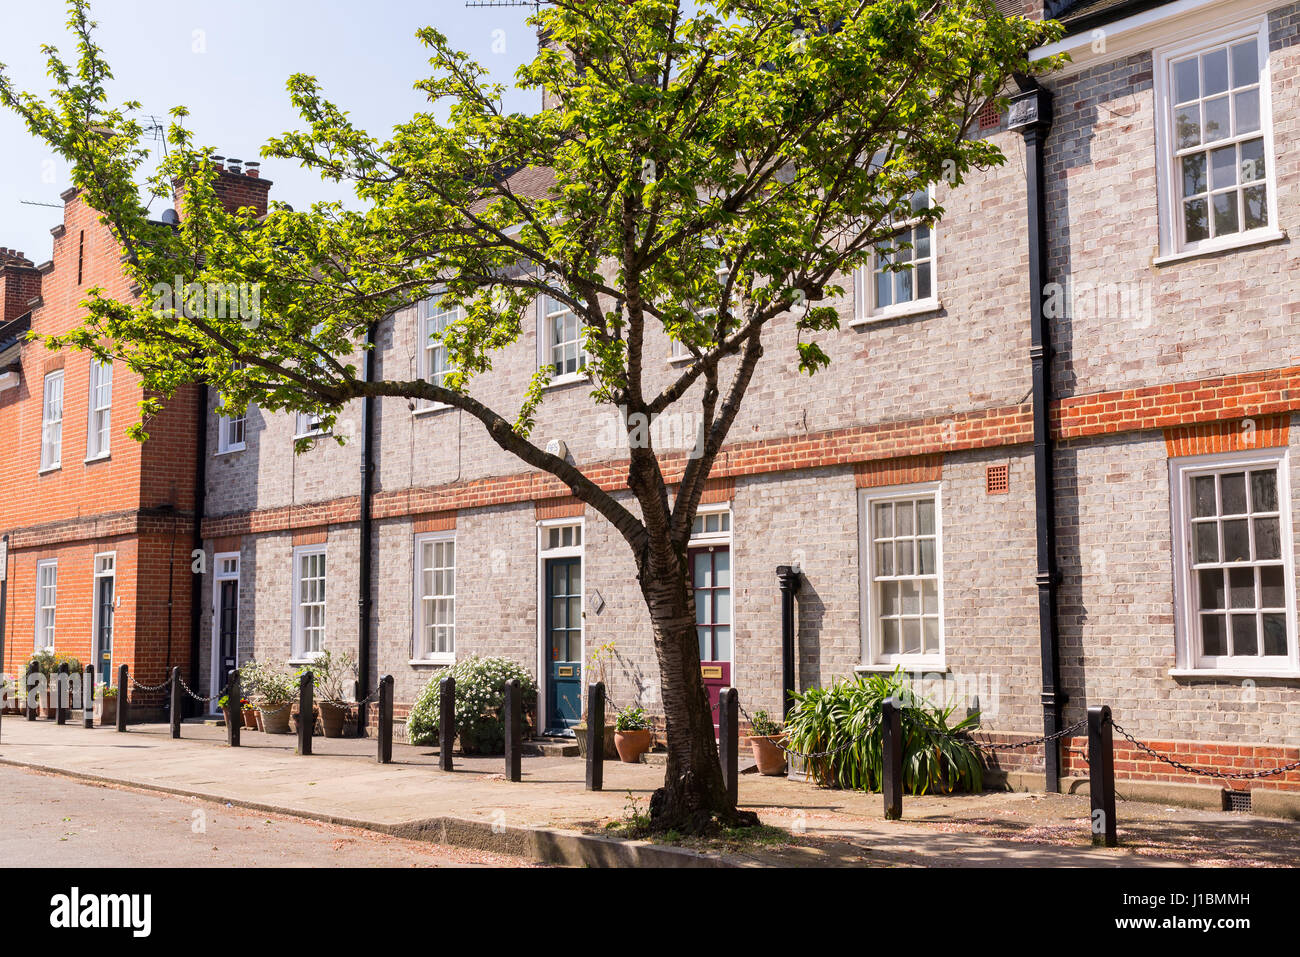 Classic British street with restored Victorian brick houses on a local road with tree growing on the pavement Stock Photo